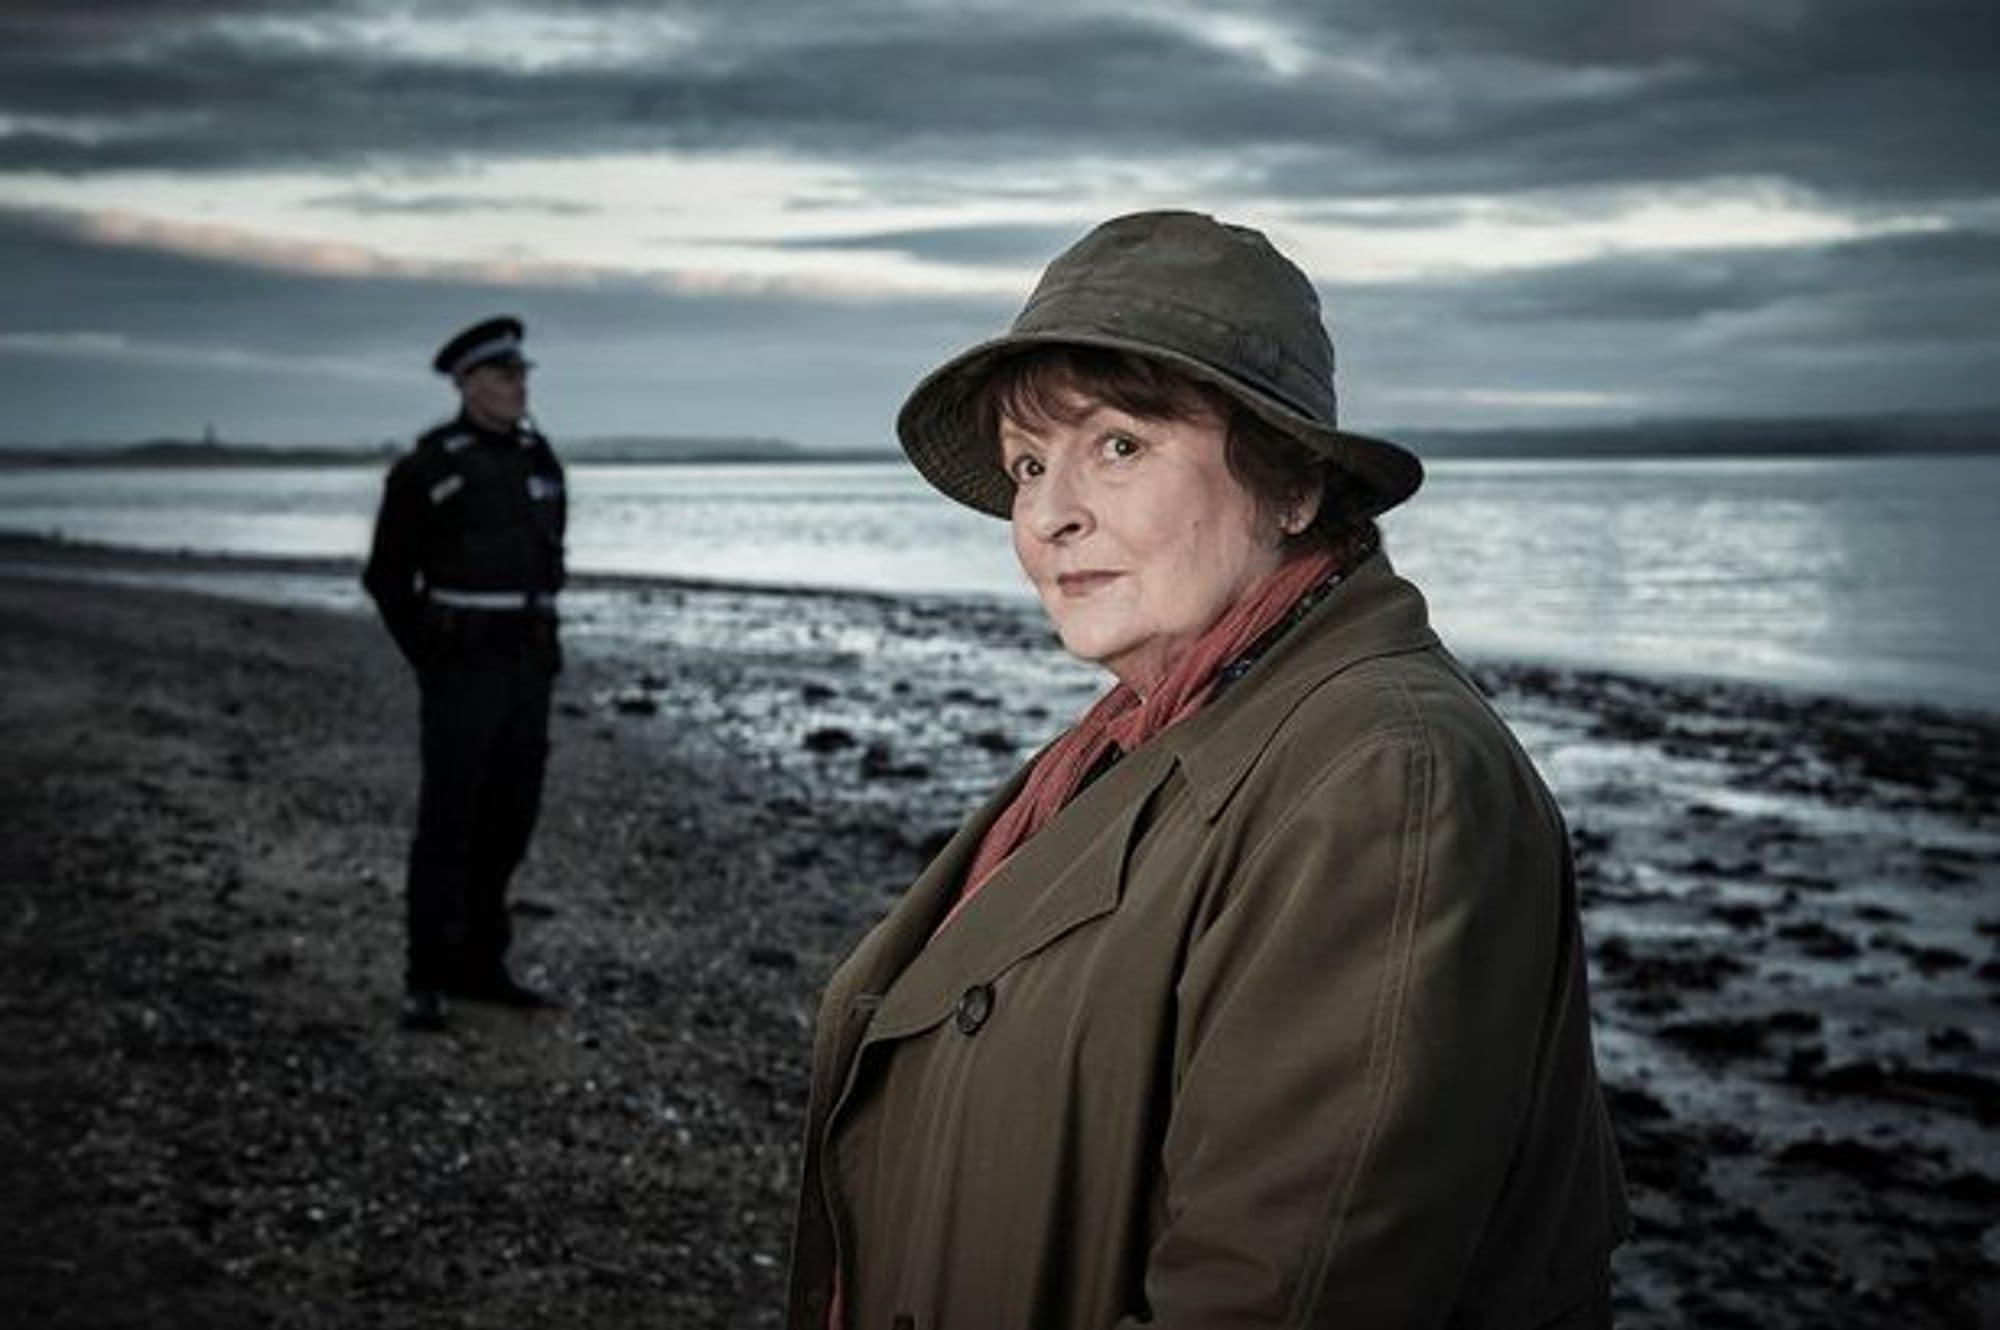 # Brenda Blethyn Bids Farewell to "Vera" After 13 Years: A Look Back at the Iconic Detective Series